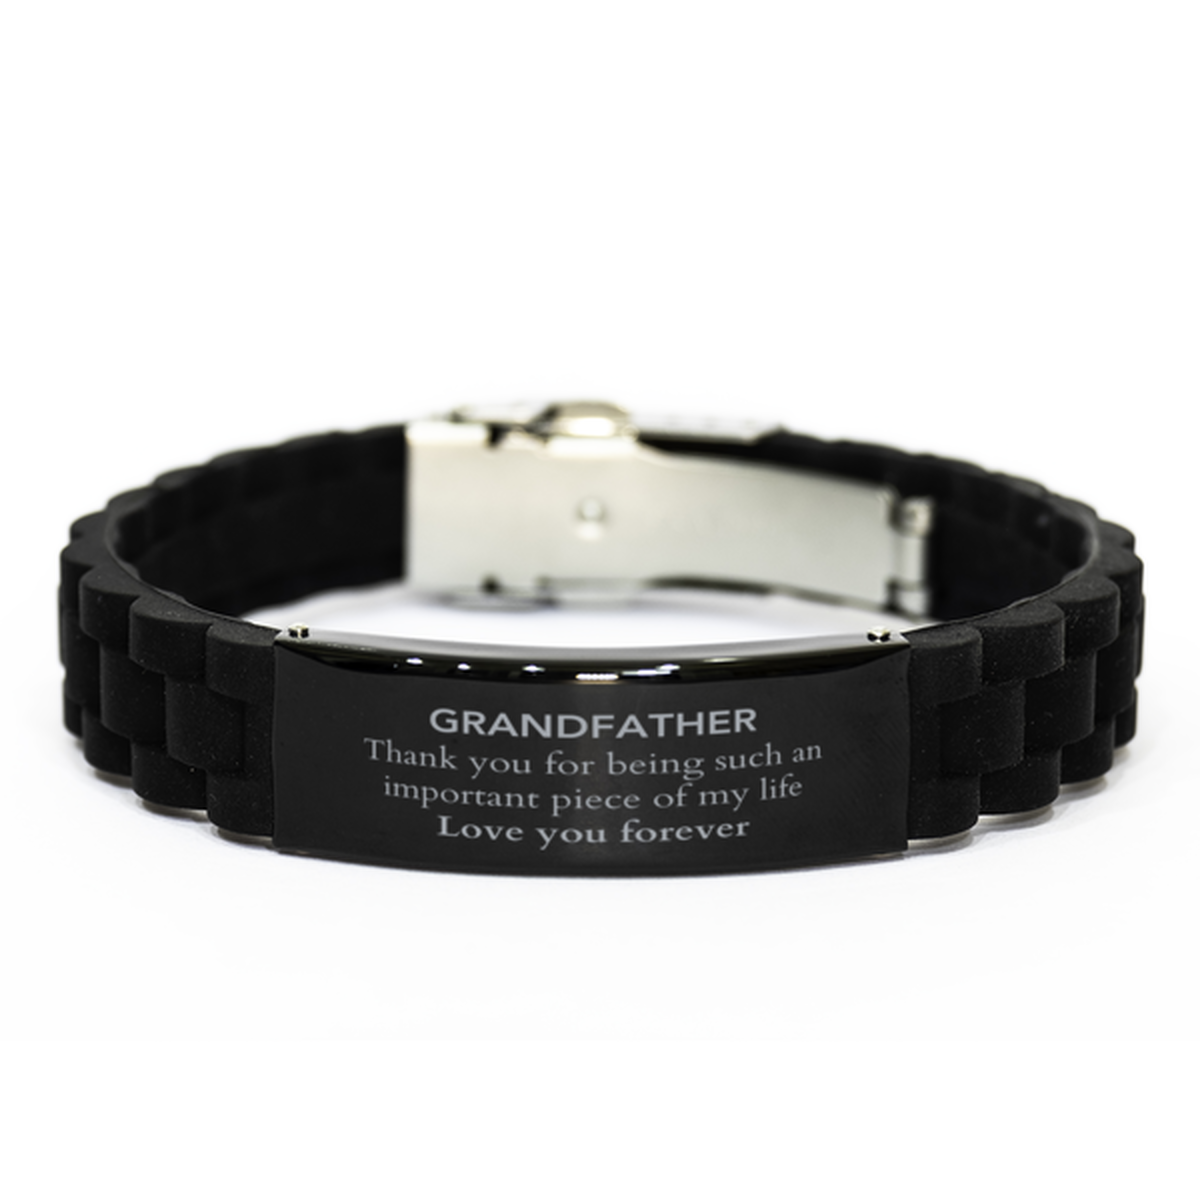 Appropriate Grandfather Black Glidelock Clasp Bracelet Epic Birthday Gifts for Grandfather Thank you for being such an important piece of my life Grandfather Christmas Mothers Fathers Day